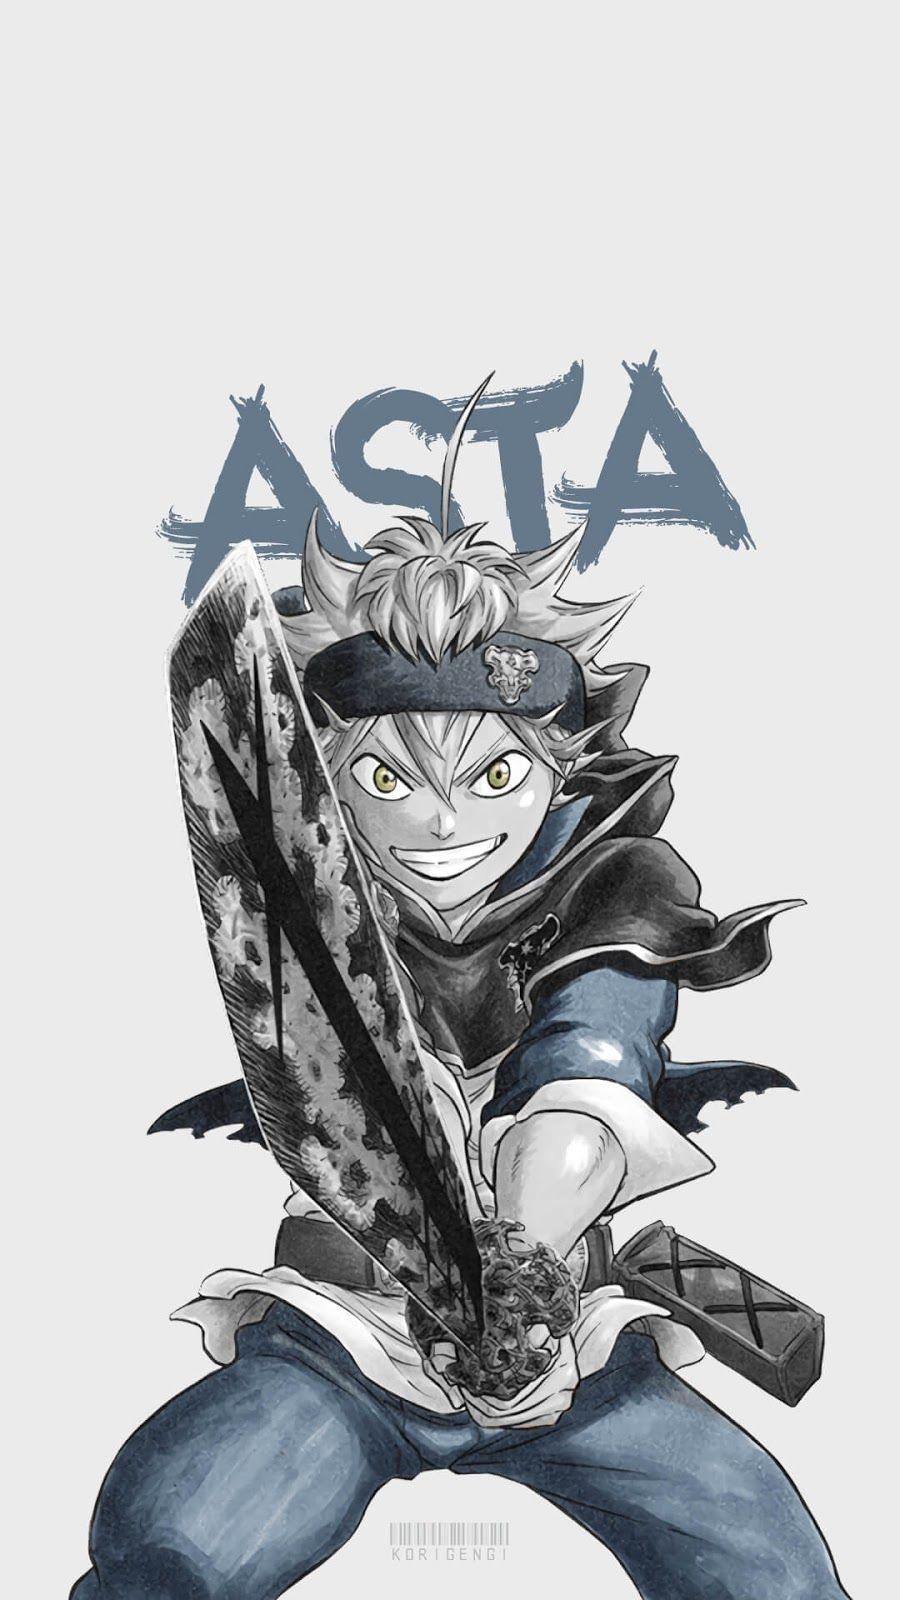 Black Clover Wallpaper for mobile phone, tablet, desktop computer and other  devices HD and 4K wallpapers.